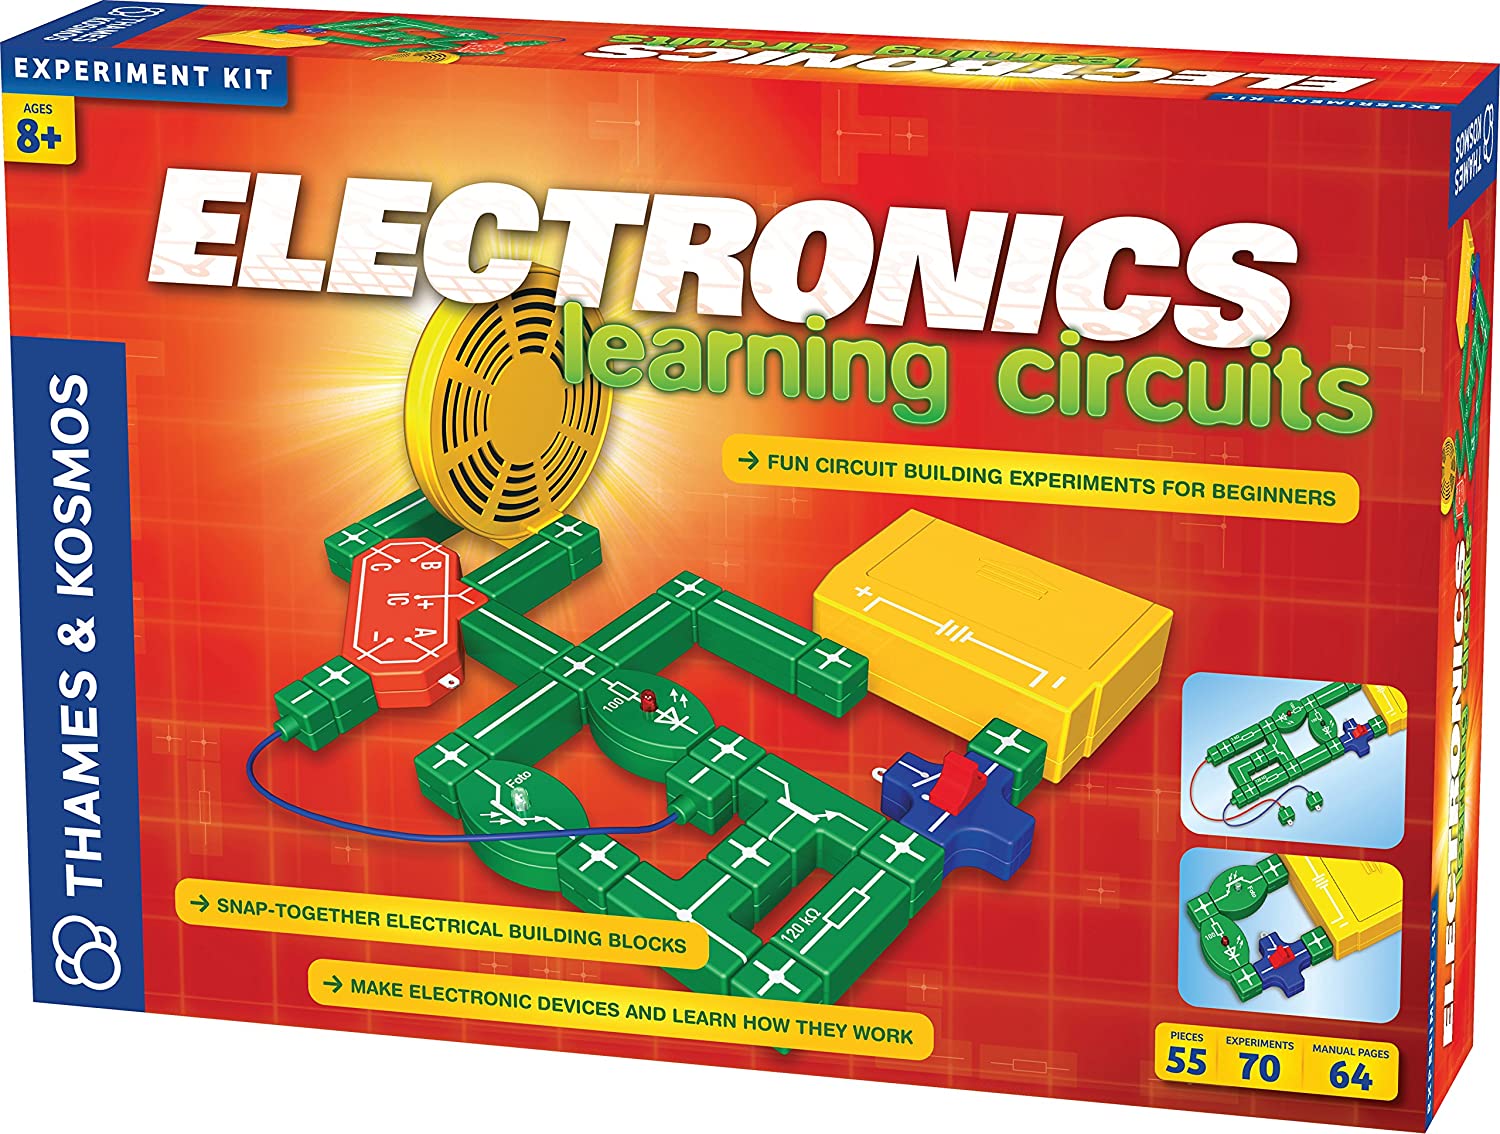 Electroics Learning Circuits